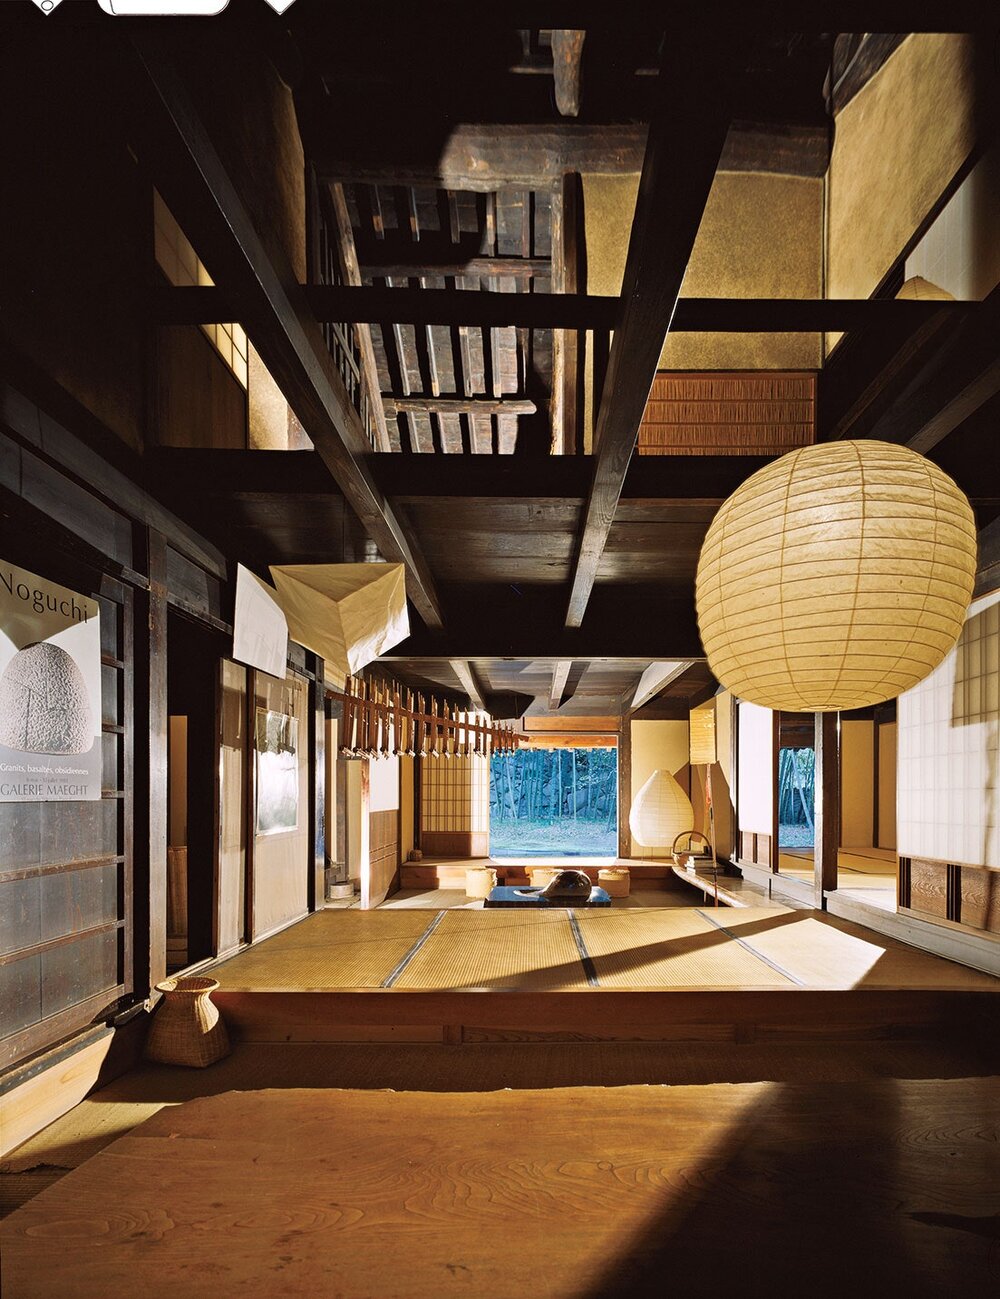  Akari in the living room of Isamu Noguchi’s residence on Shikoku island. Source:  Architectural Digest  